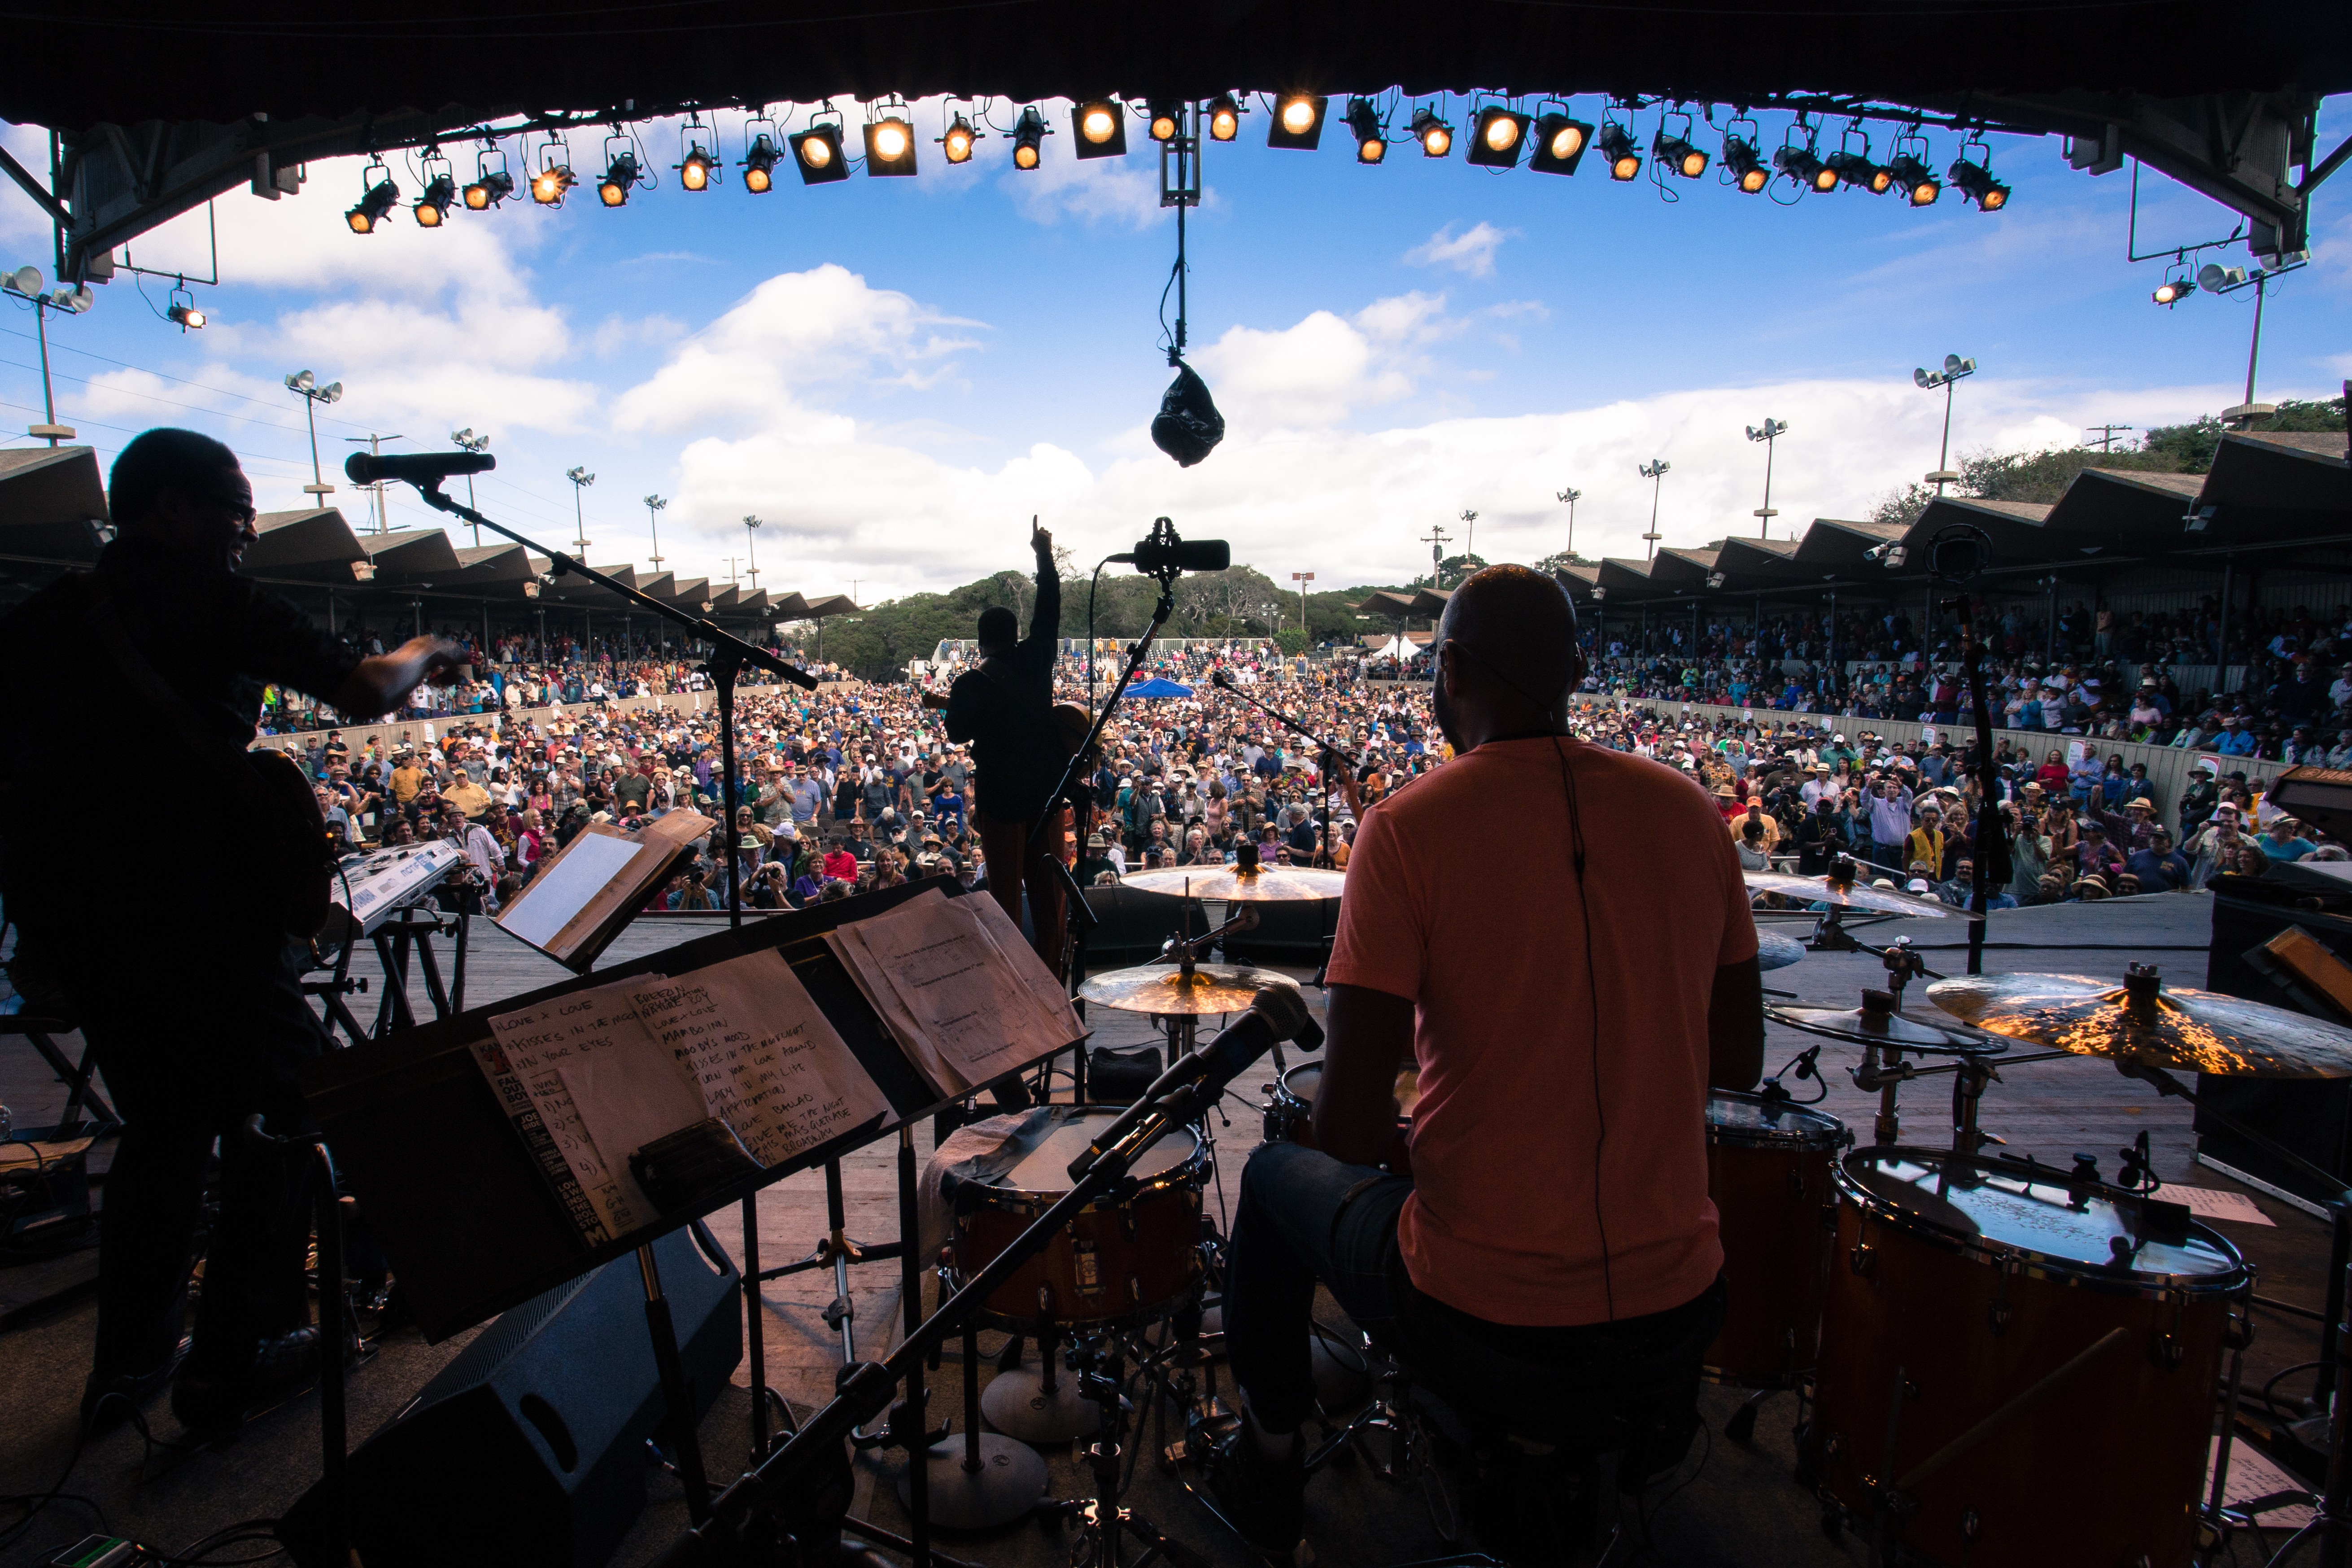 The Monterey Jazz Festival in California was launched in 1958, and remains the world’s longest consecutively run jazz festival.